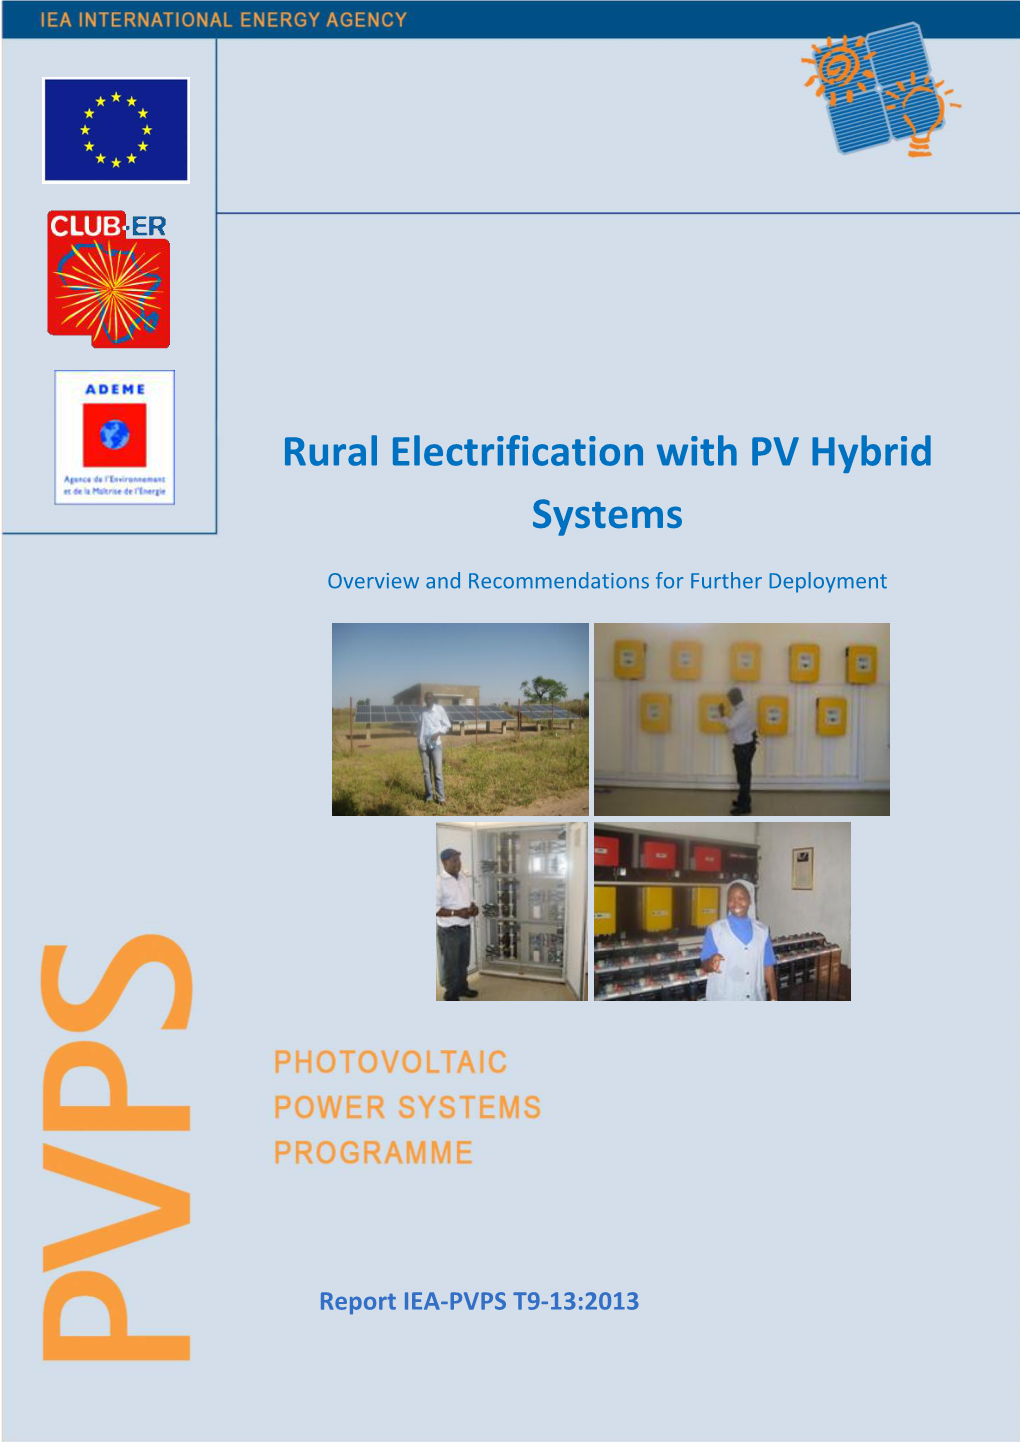 Rural Electrification with PV Hybrid Systems